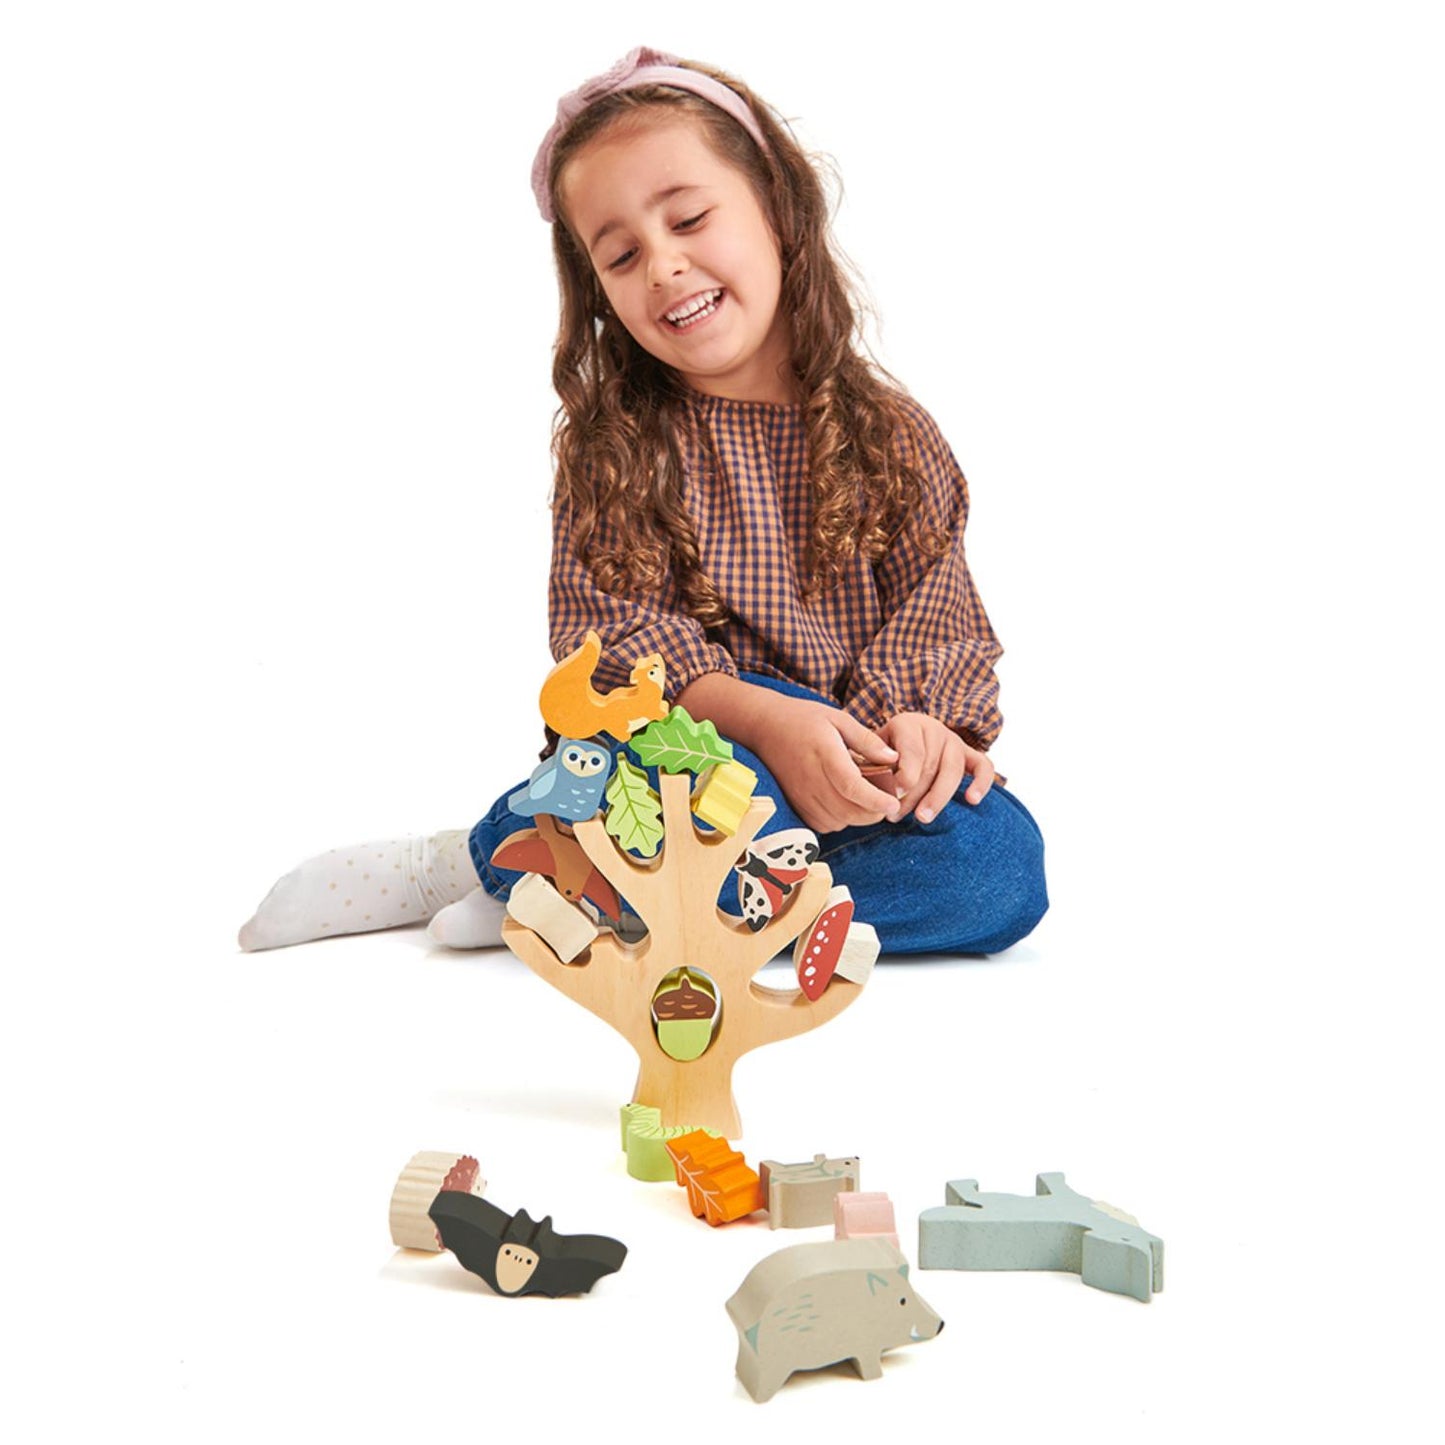 Tender Leaf Toys Stacking Forest | Stacking + Balancing Wooden Toy | Lifestyle: Girl Playing With Stacker | BeoVERDE.ie